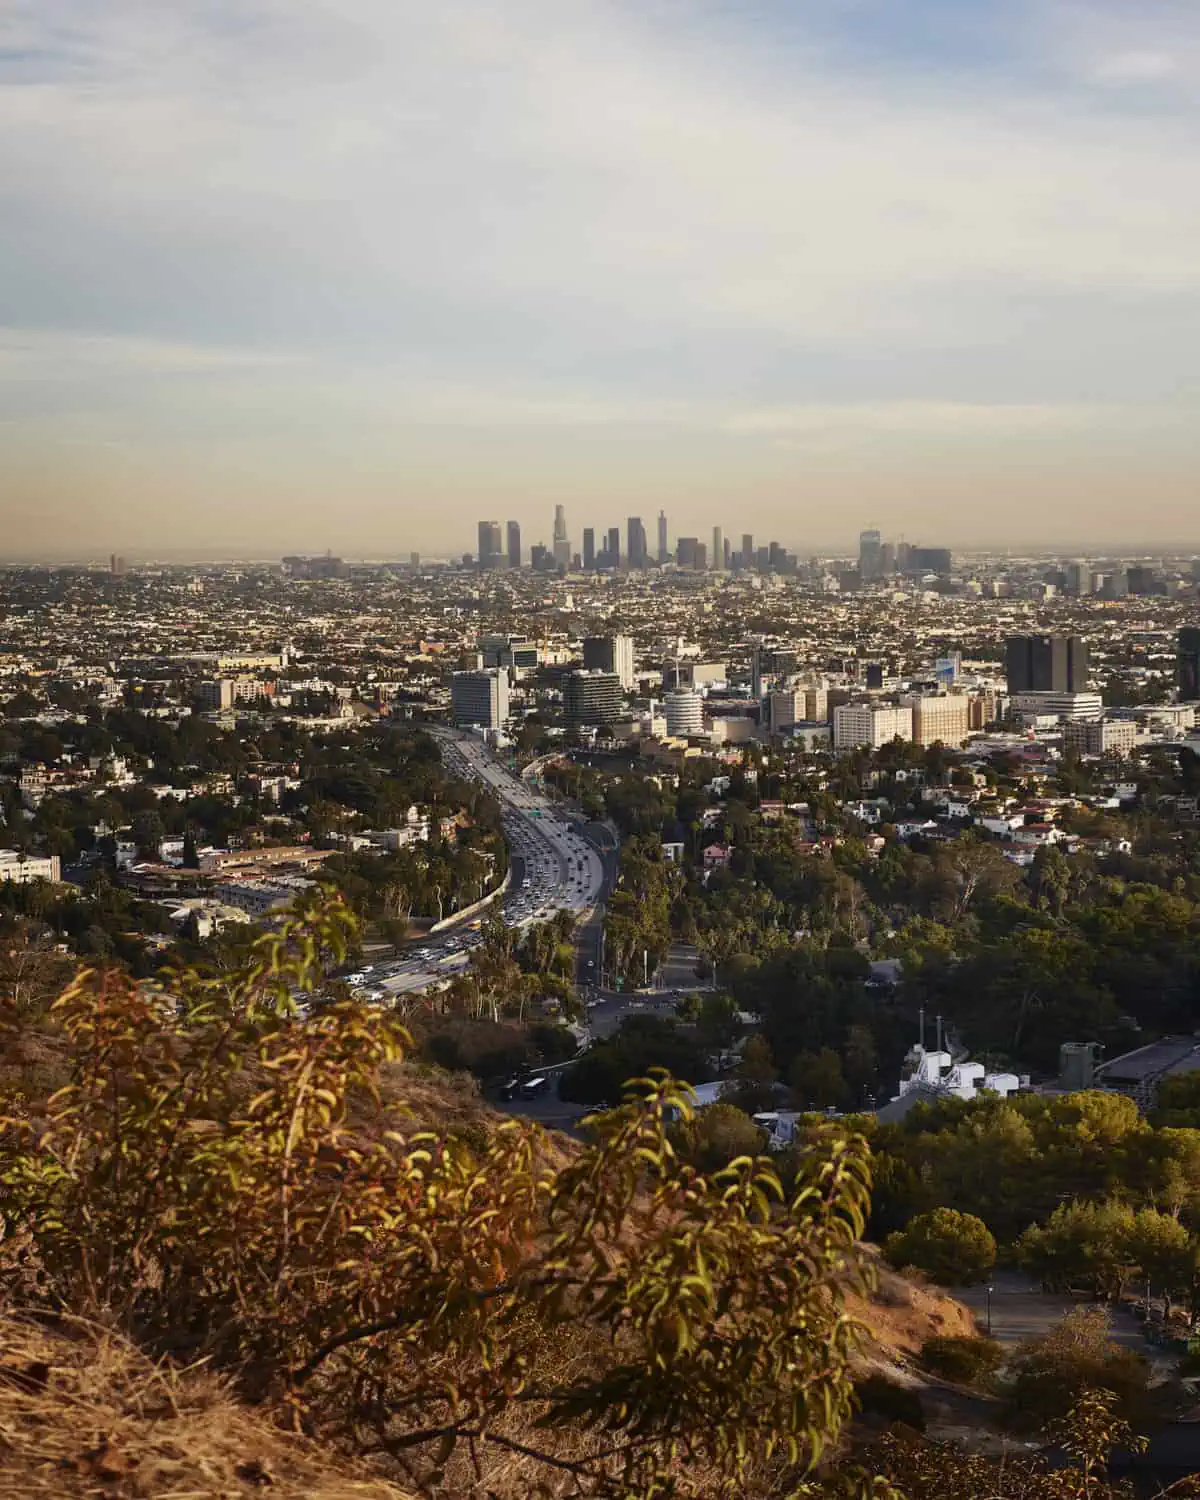 Our daily hike in North Hollywood took us to this view.